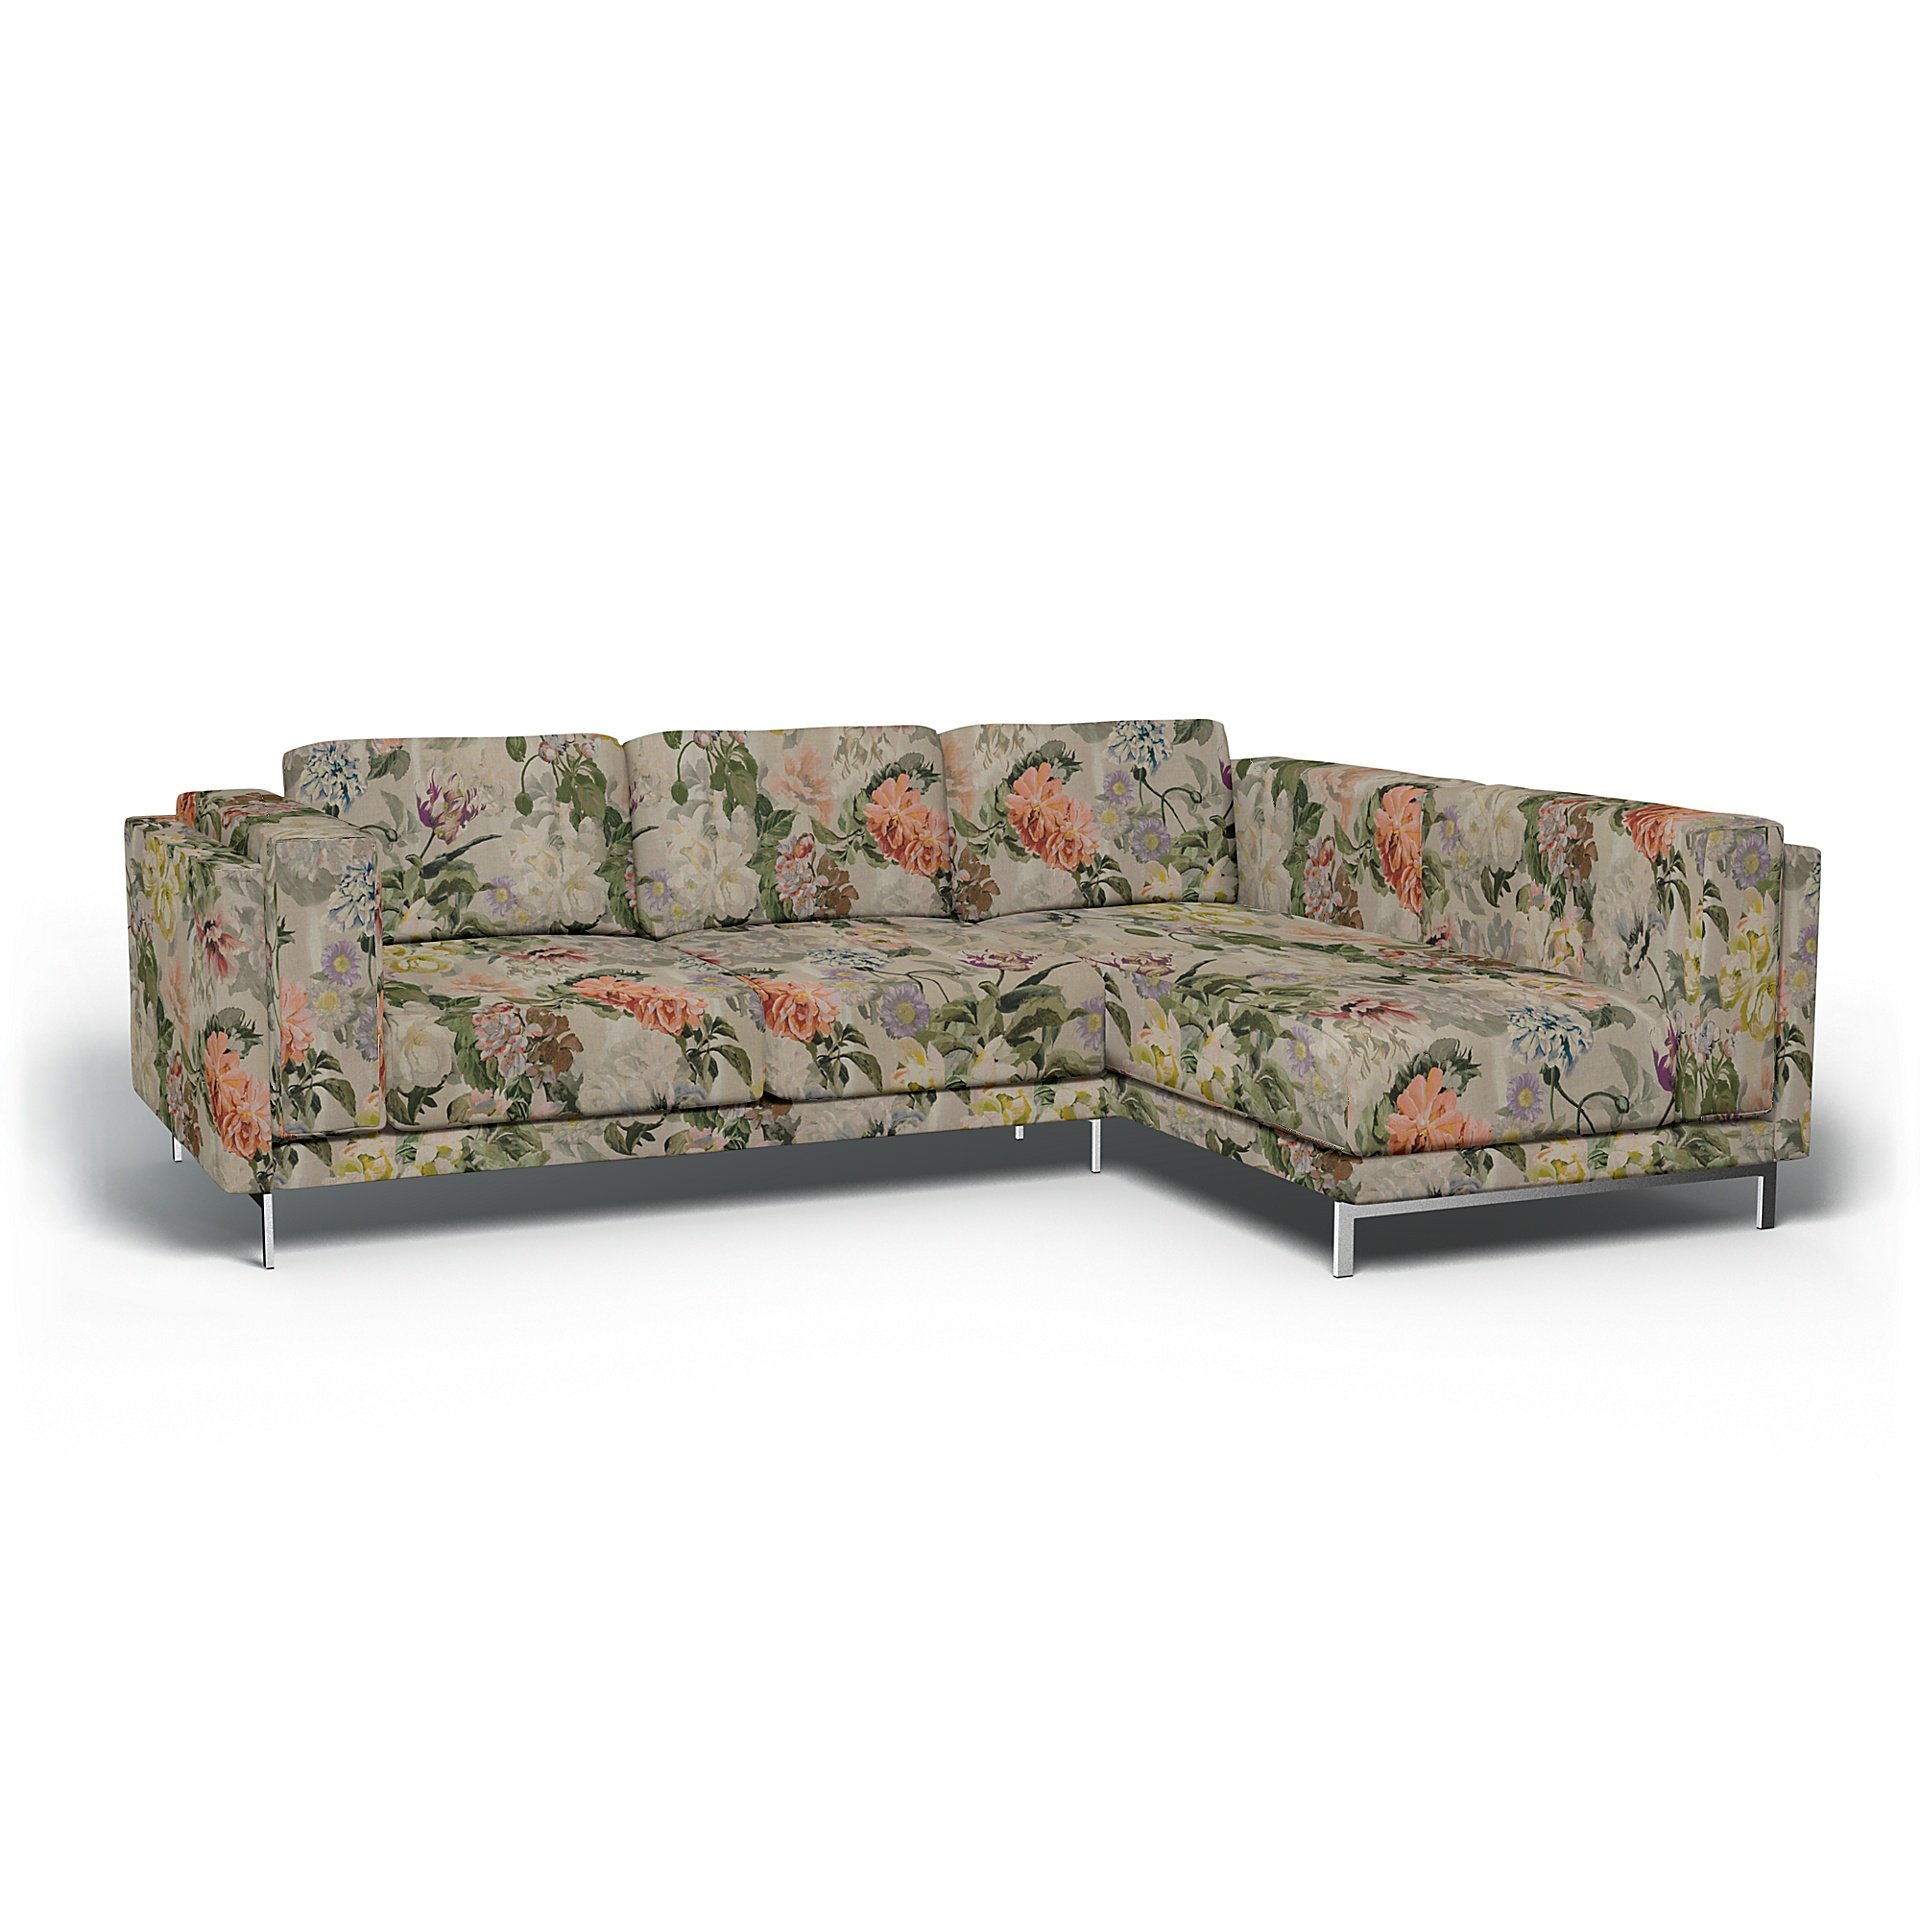 IKEA - Nockeby 3 Seat Sofa with Right Chaise Cover, Delft Flower - Tuberose, Linen - Bemz